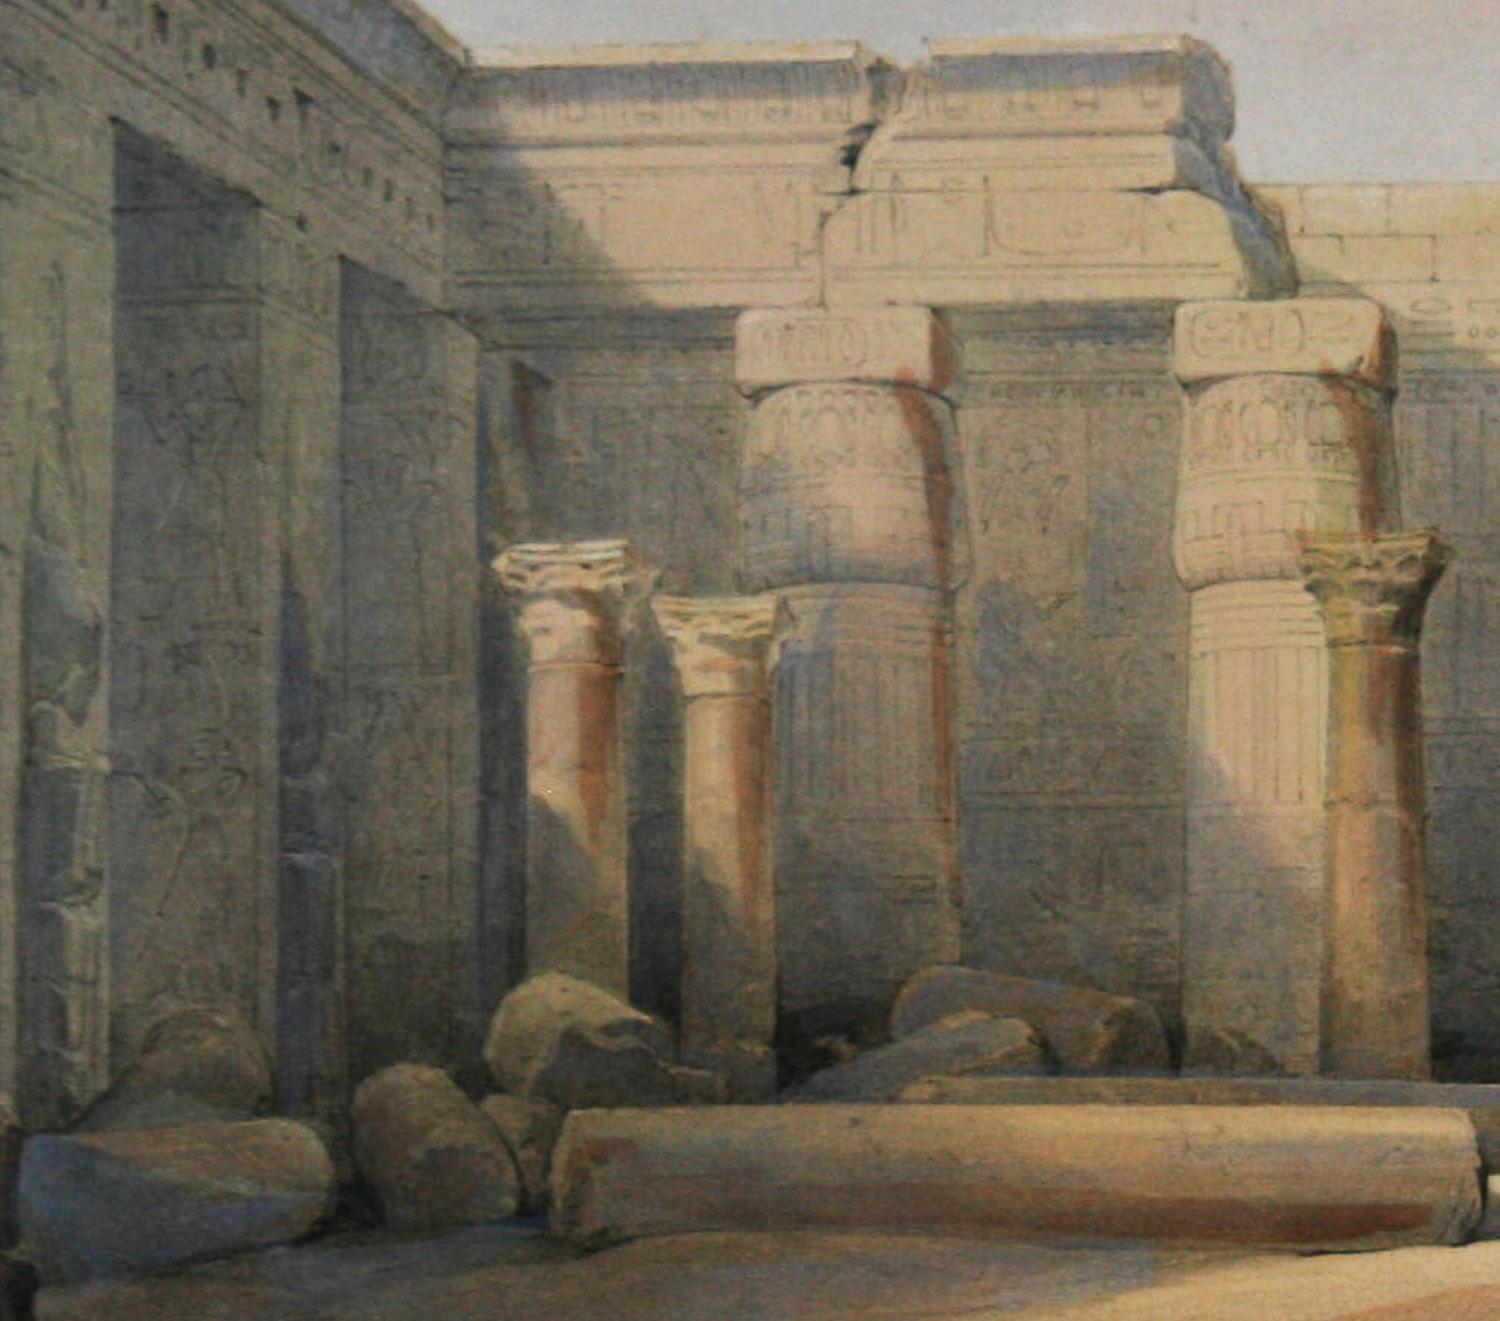 Abou, Thebes, Granat  Lithographie „ Views of the Holy Land“ von David Roberts im Angebot 3